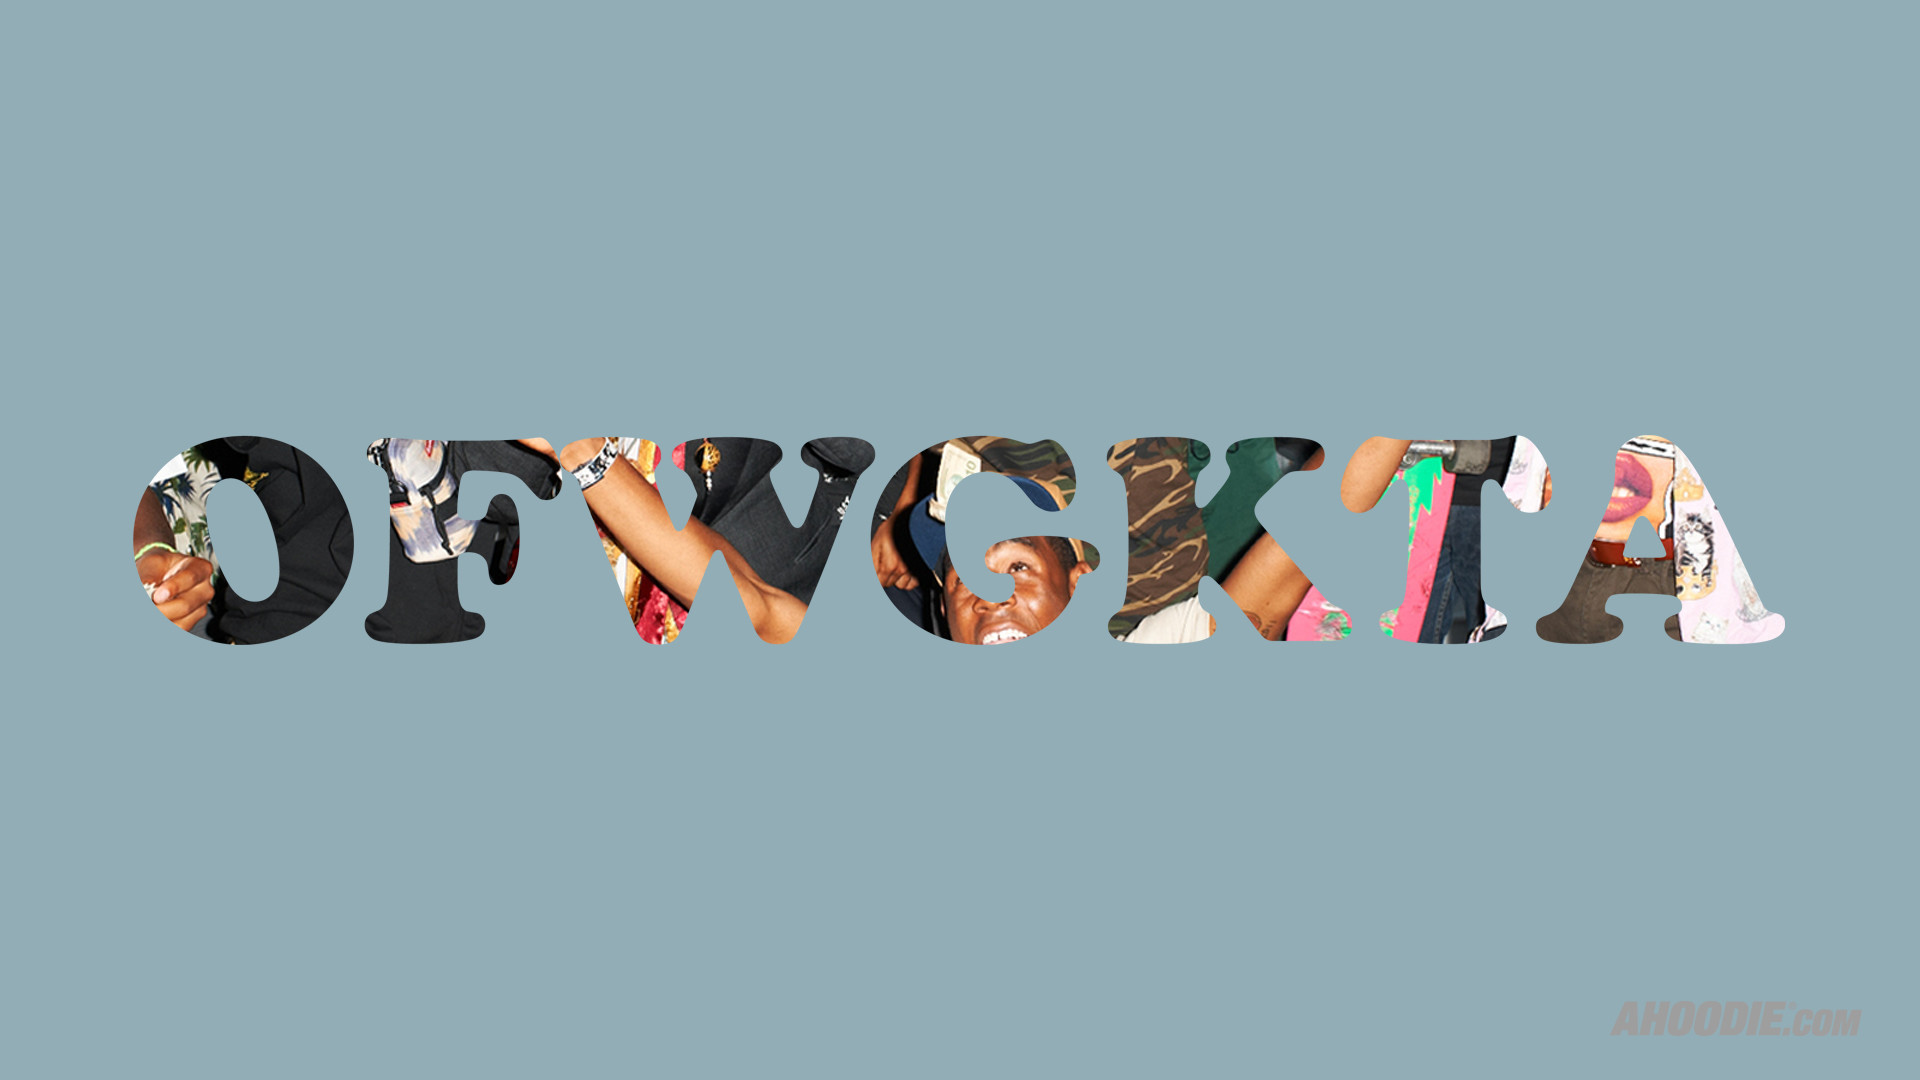 1920x1080 Odd Future | Odd Future Images, Pictures, Wallpapers On KinYu-Z.net